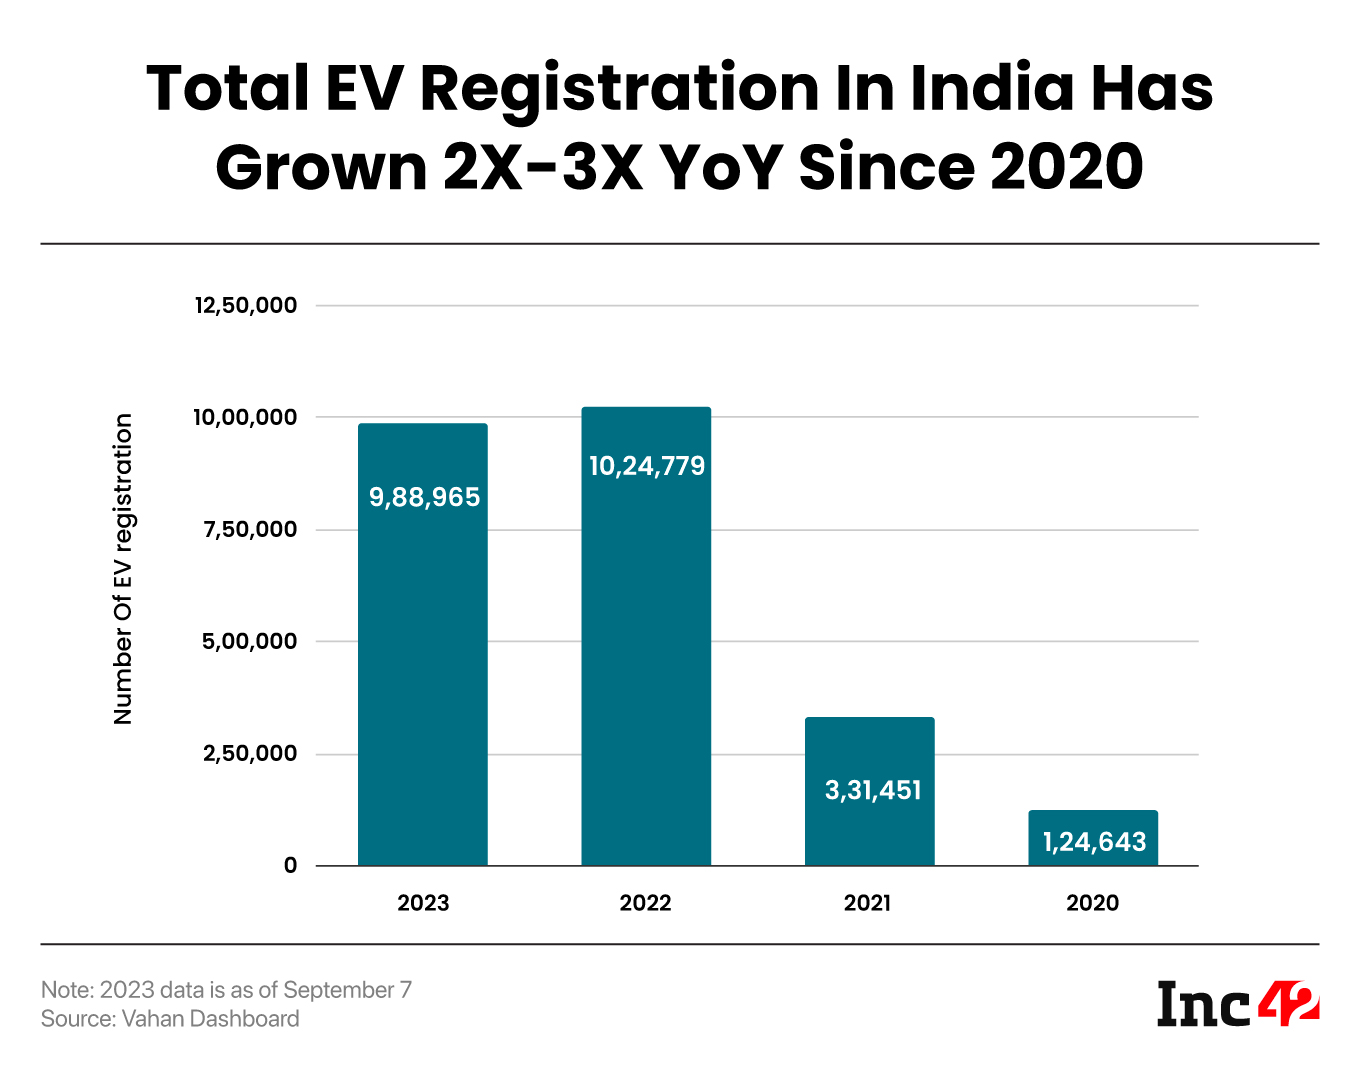 Total EV Registration In India Has Grown 2X-3X YoY Since 2020